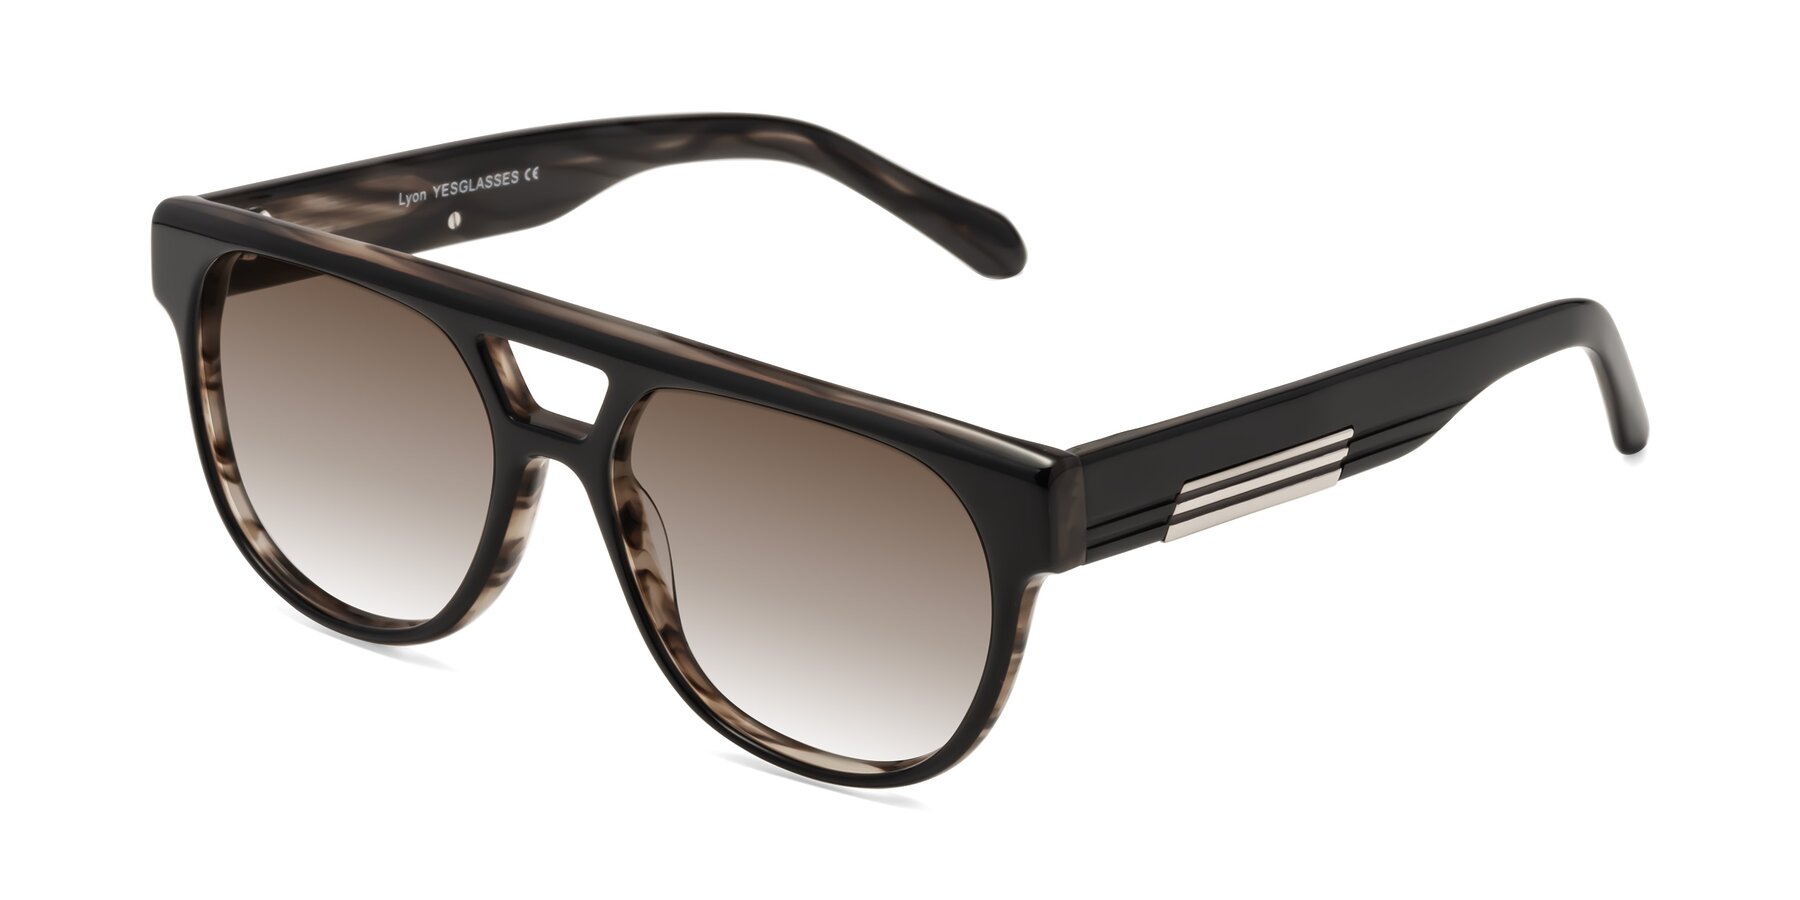 Angle of Lyon in Black-Brown with Brown Gradient Lenses